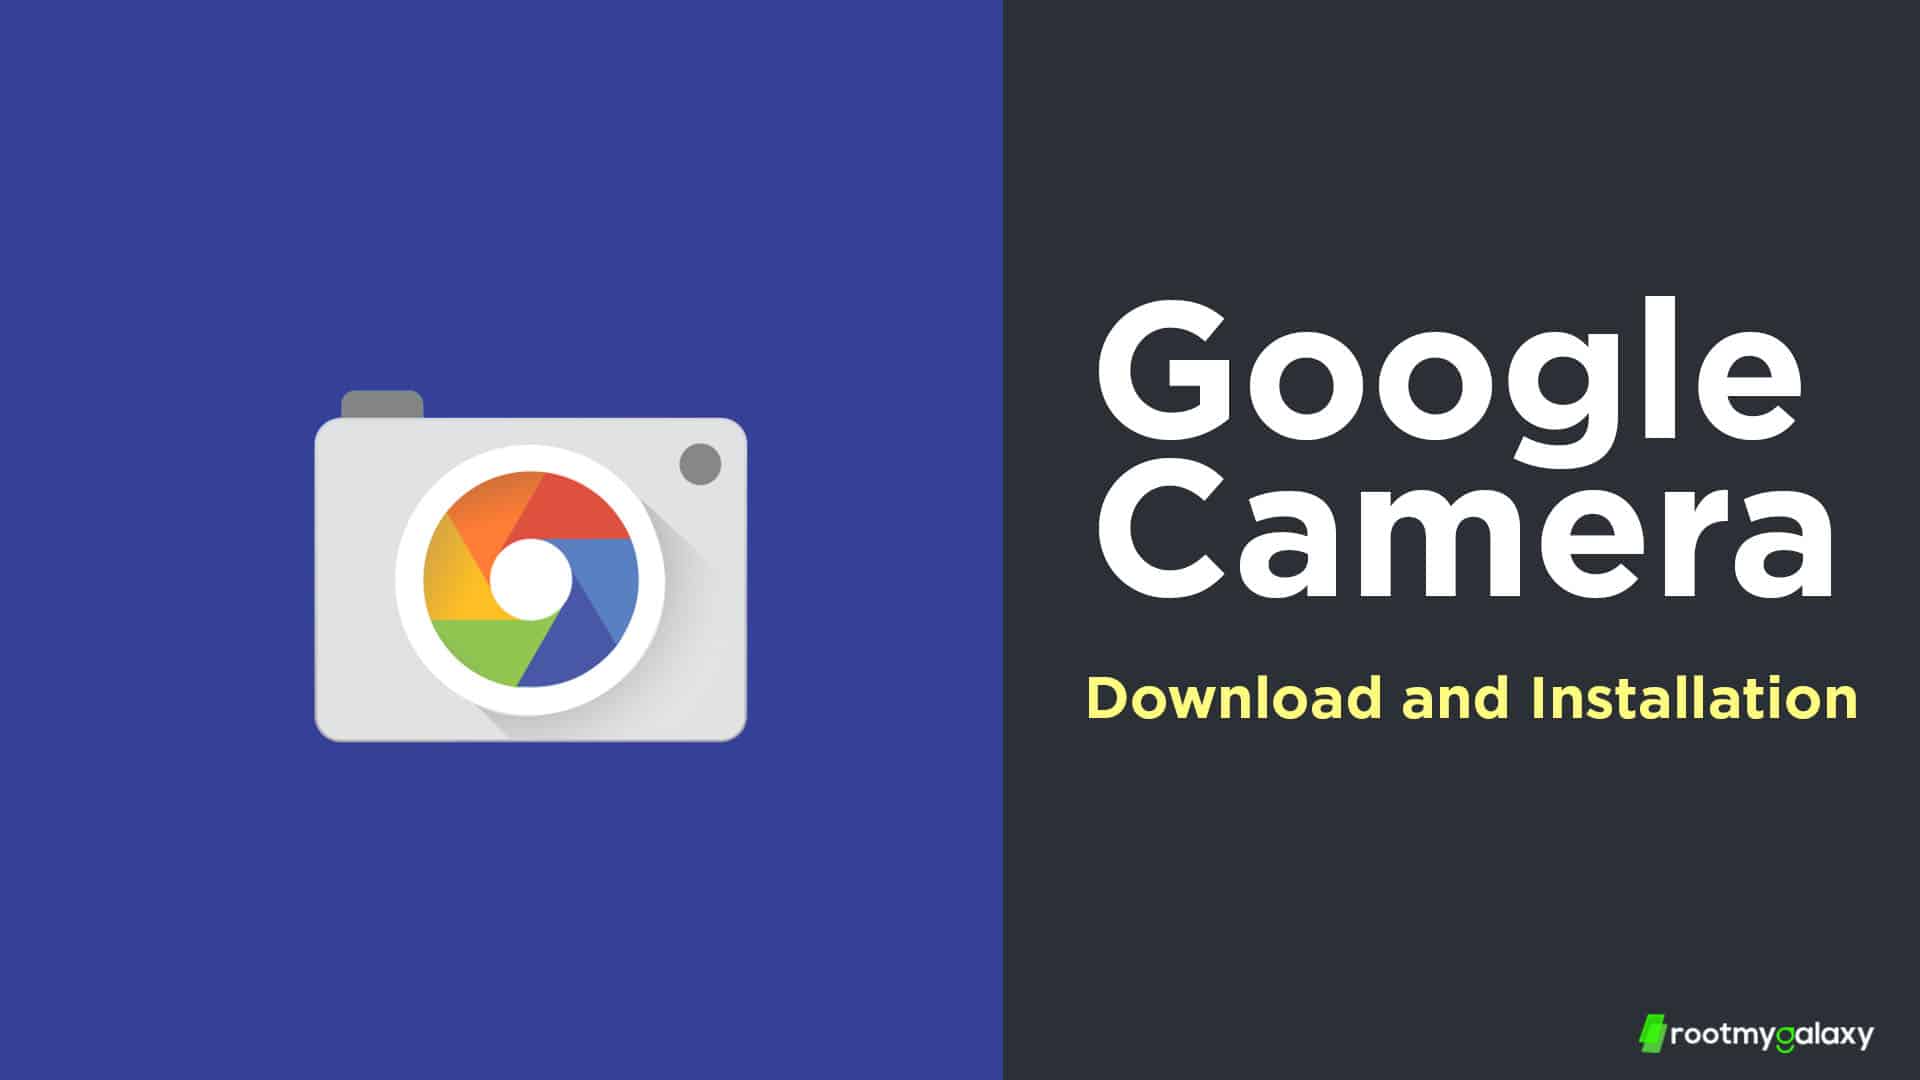 Google Pixel 6 Pro Camera on any Android smartphone